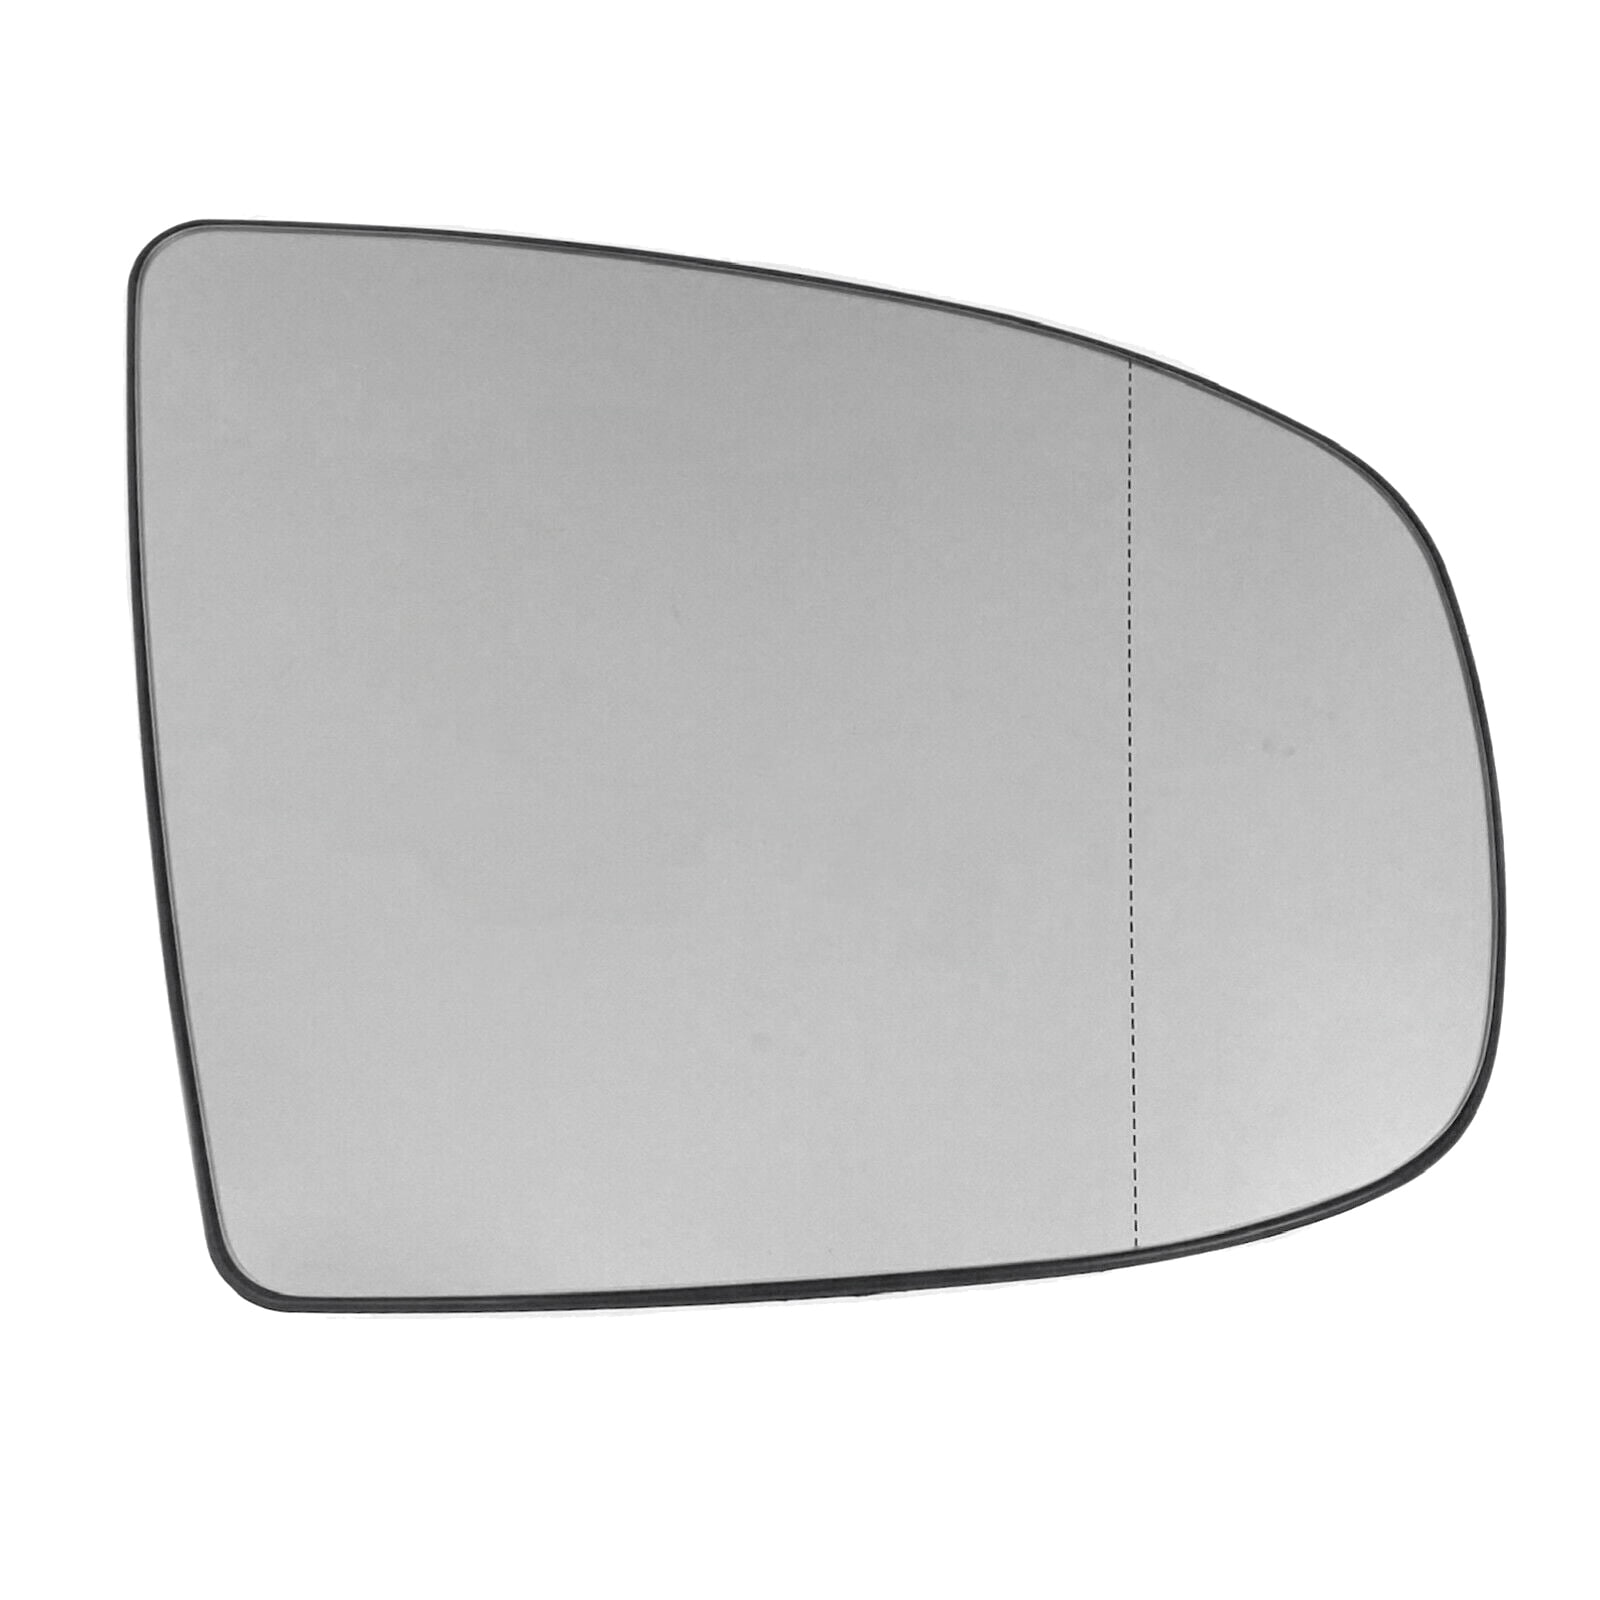 For BMW X5 E70 LCI 2007-2013 Right Passenger Side Rearview Heated Mirror Glass